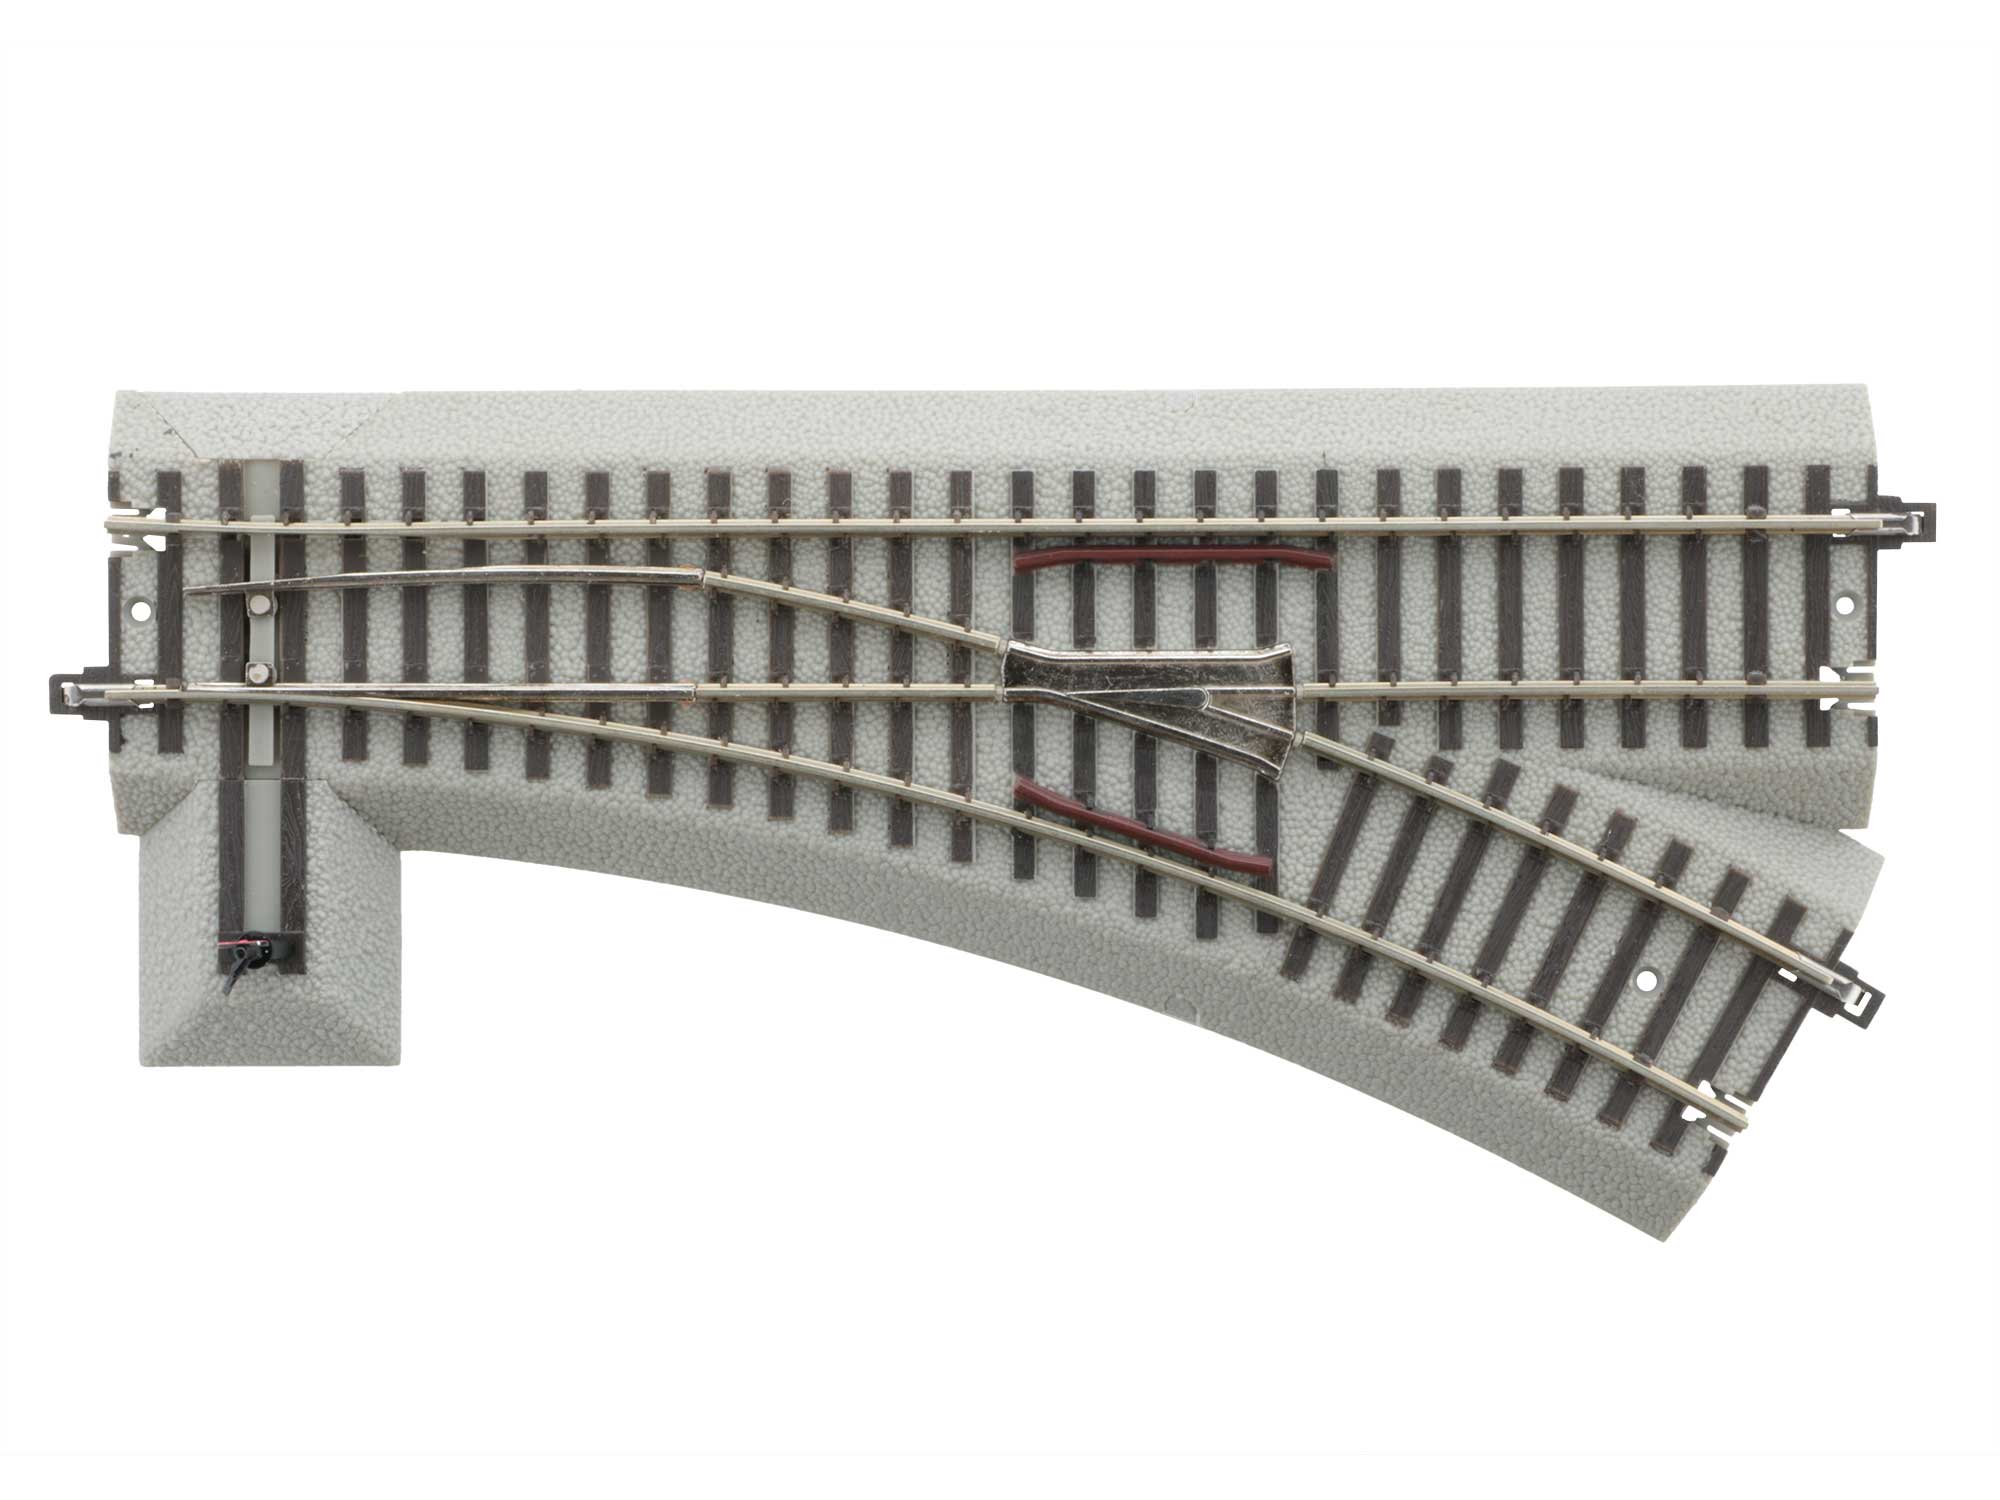 Lionel 649869 S Manual R20 Turnout FasTrack Right